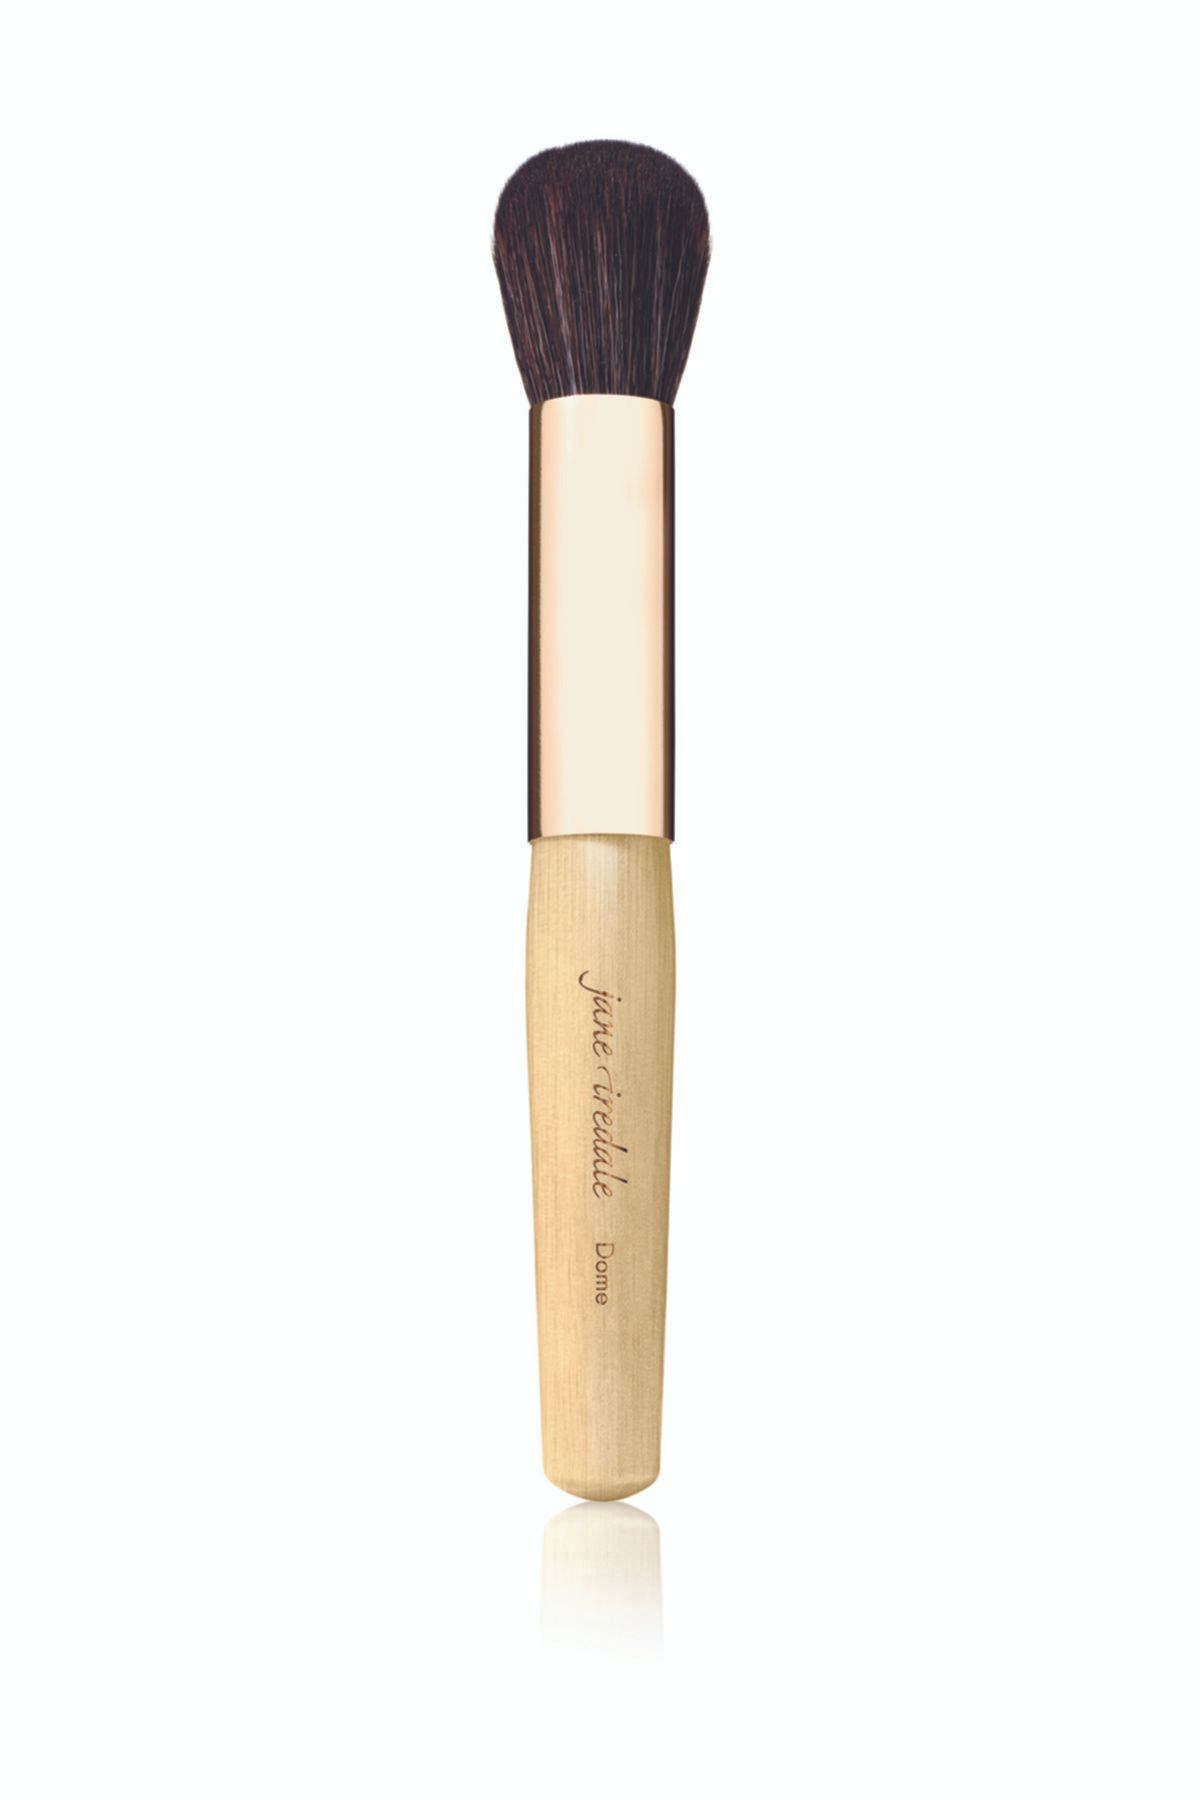 Jane Iredale Dome Brush #rose Gold